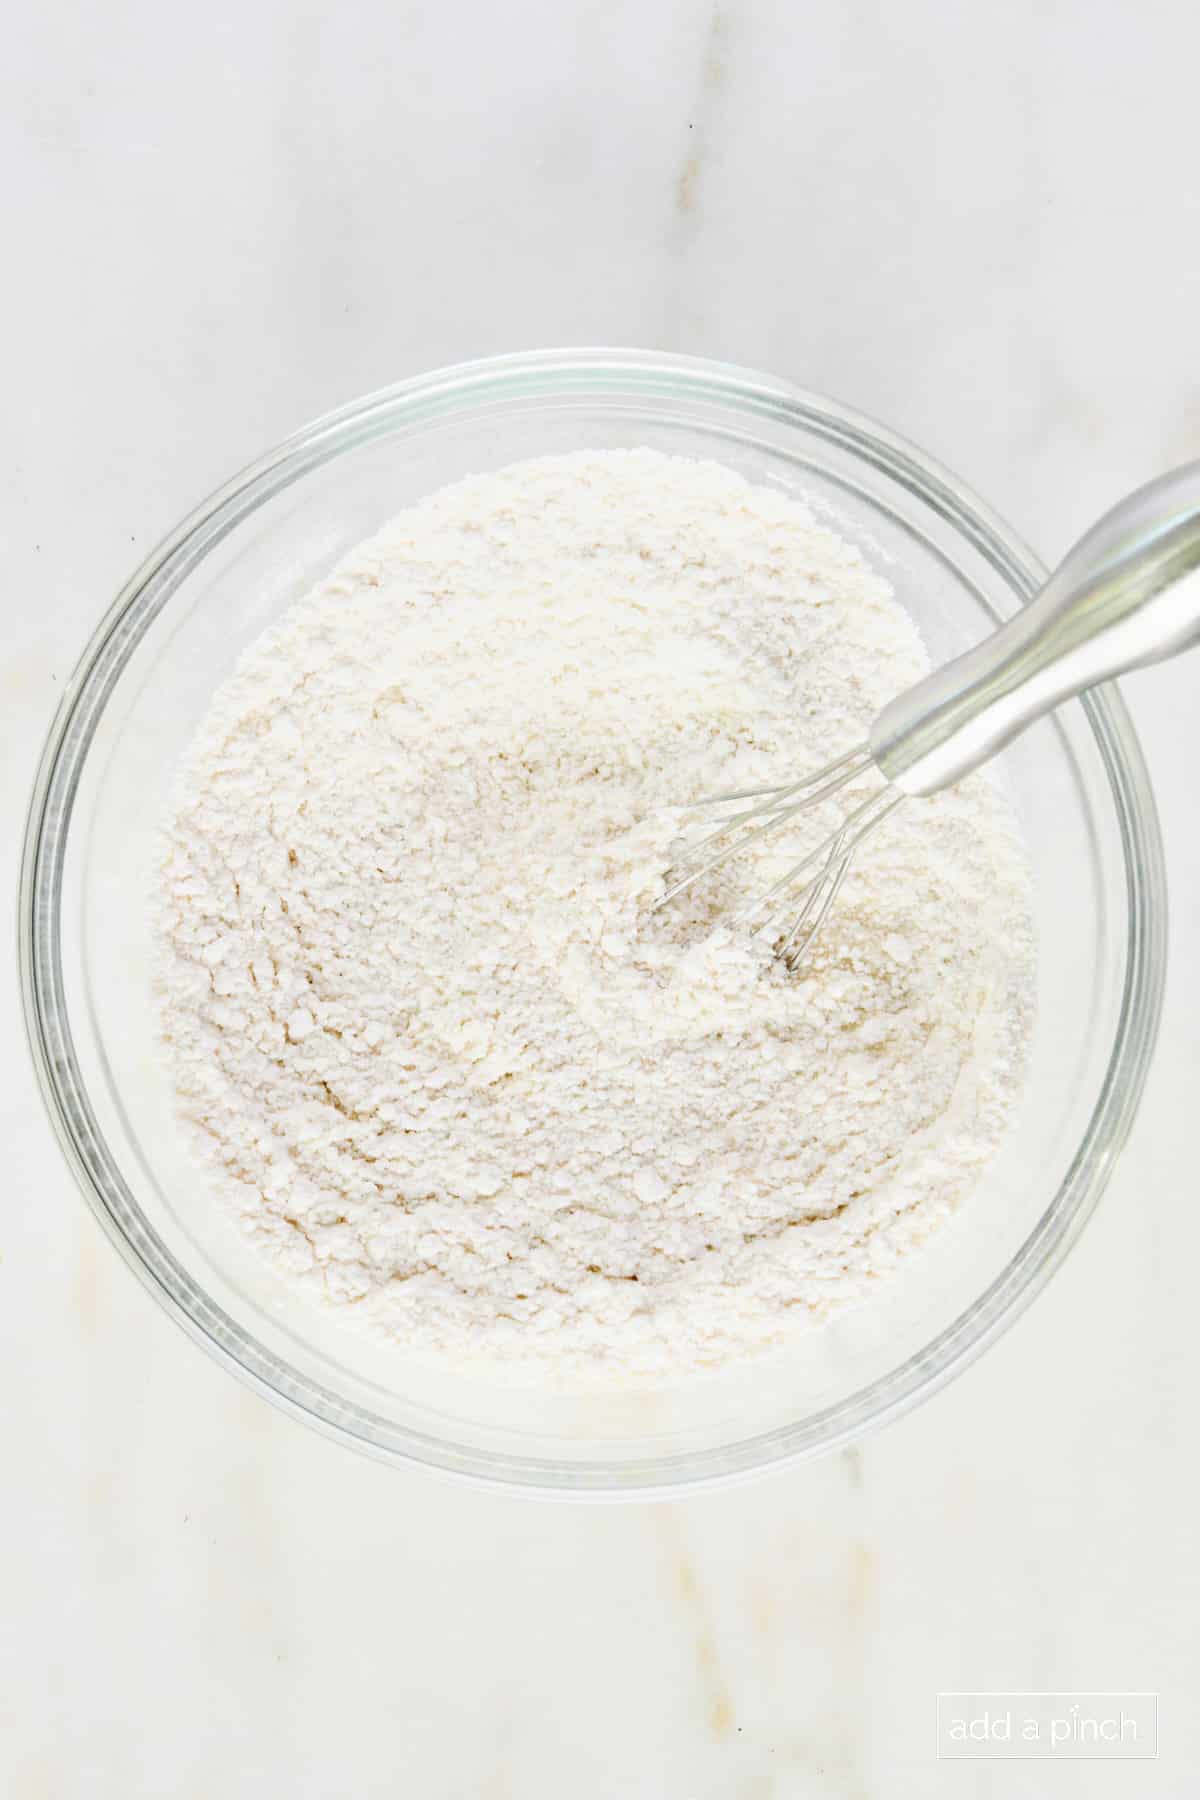 Whisked flour mixture in a glass bowl